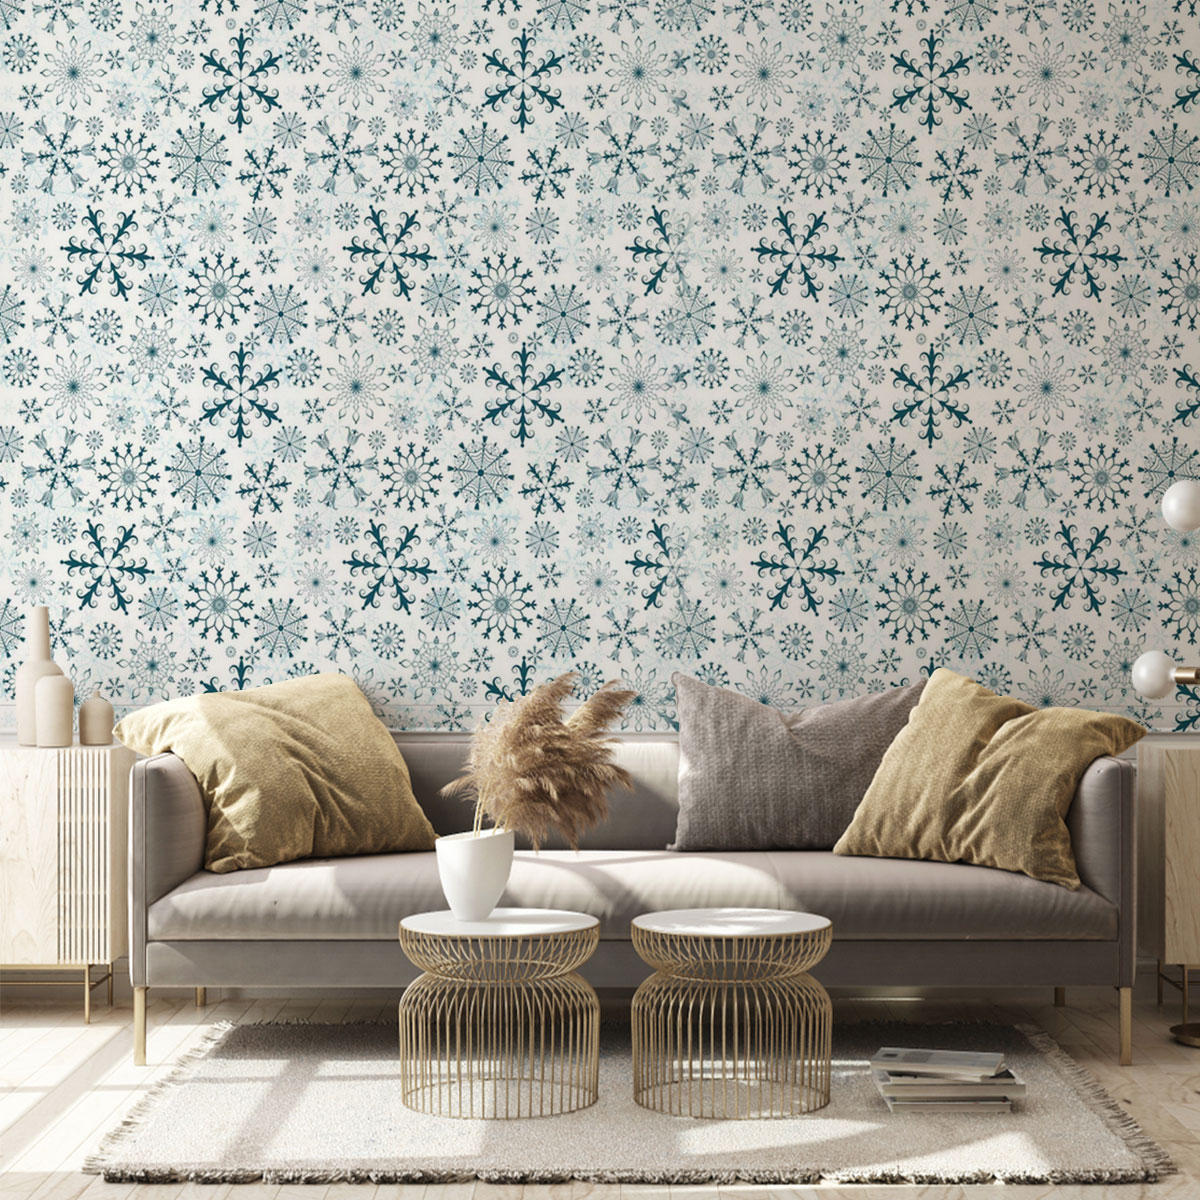 Blue Snowflakes Winter Wall Mural